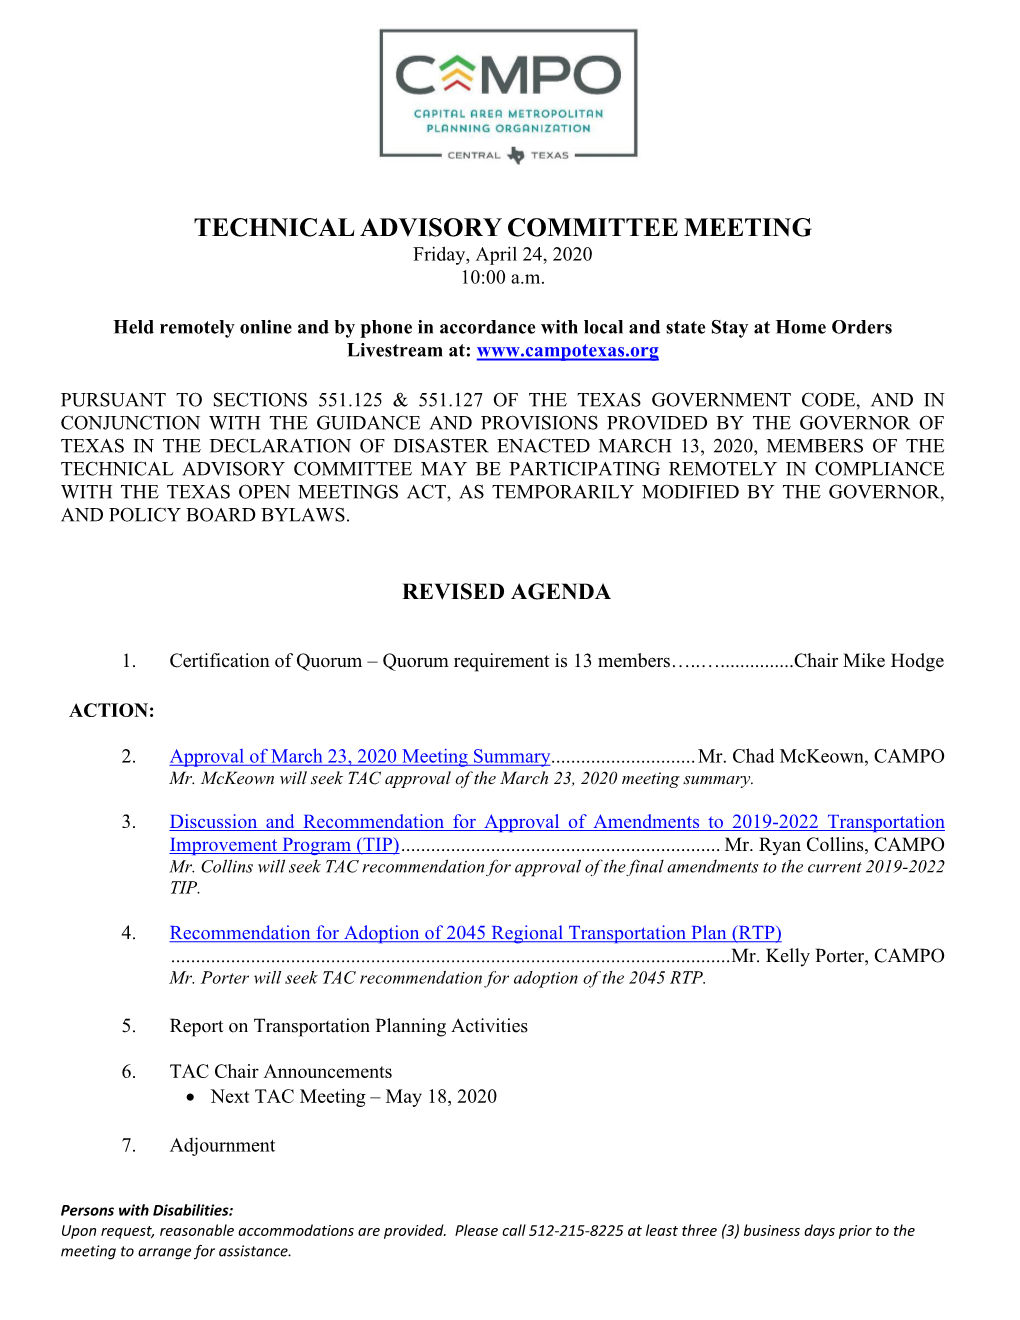 TECHNICAL ADVISORY COMMITTEE MEETING Friday, April 24, 2020 10:00 A.M